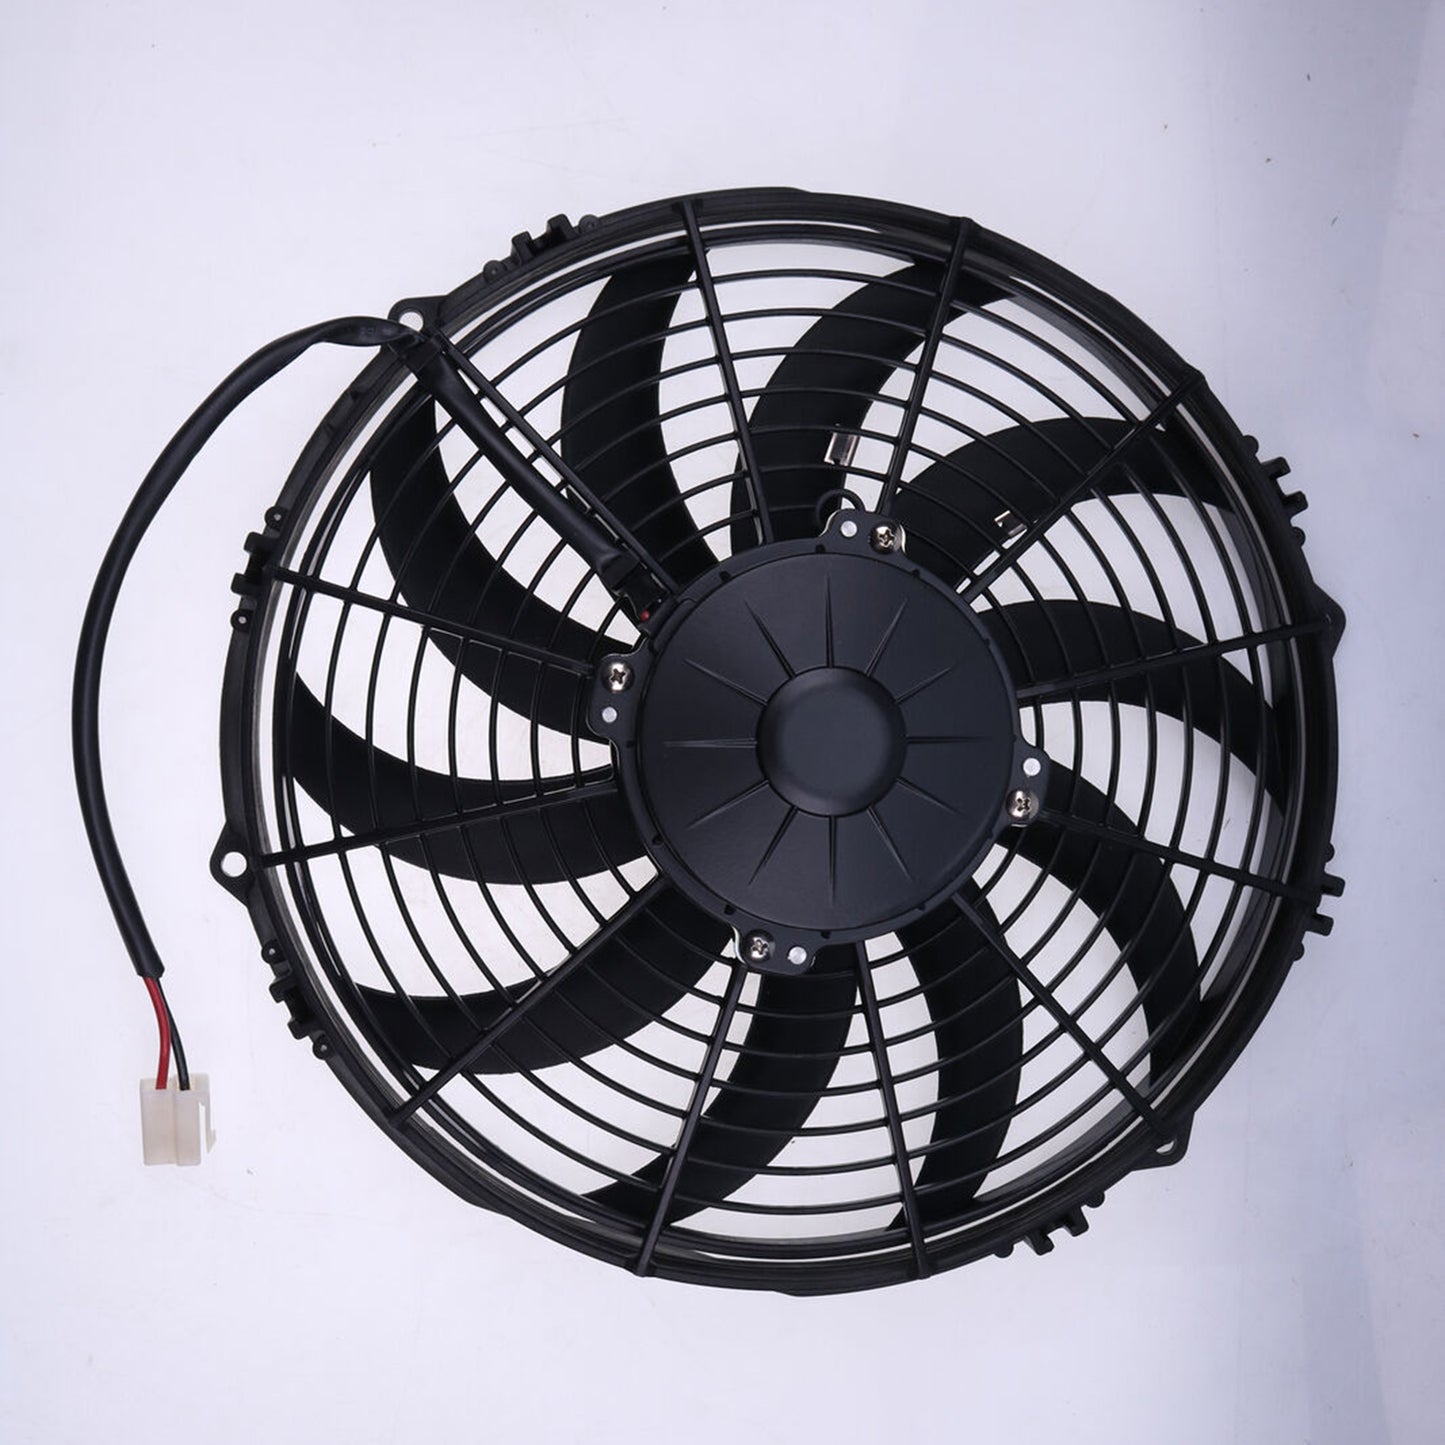 VA10-BP50/C-61A Fan Curved 305mm Diameter 24V Compatible with Spal